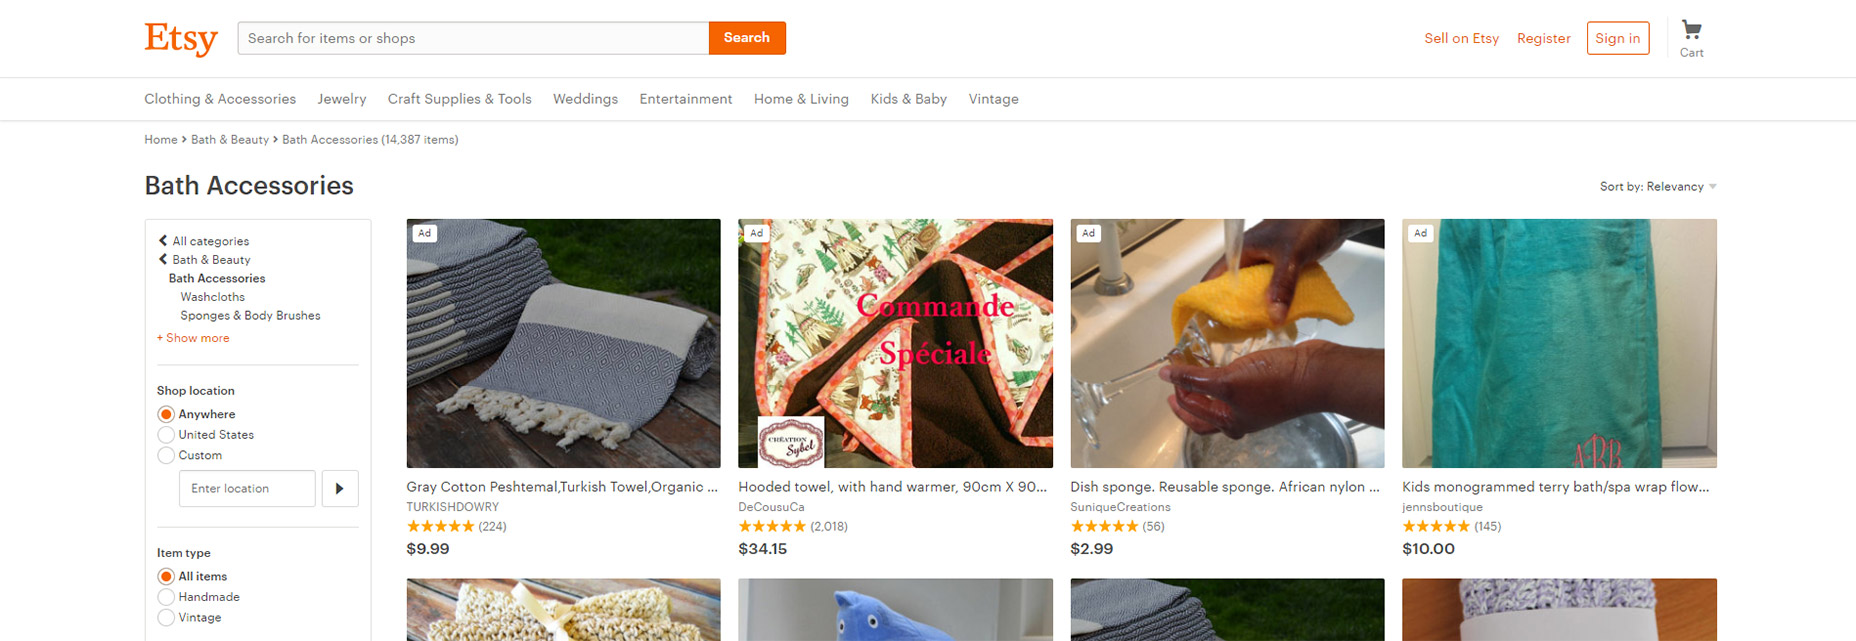 10-etsy-breadcrumbs-category-navigation